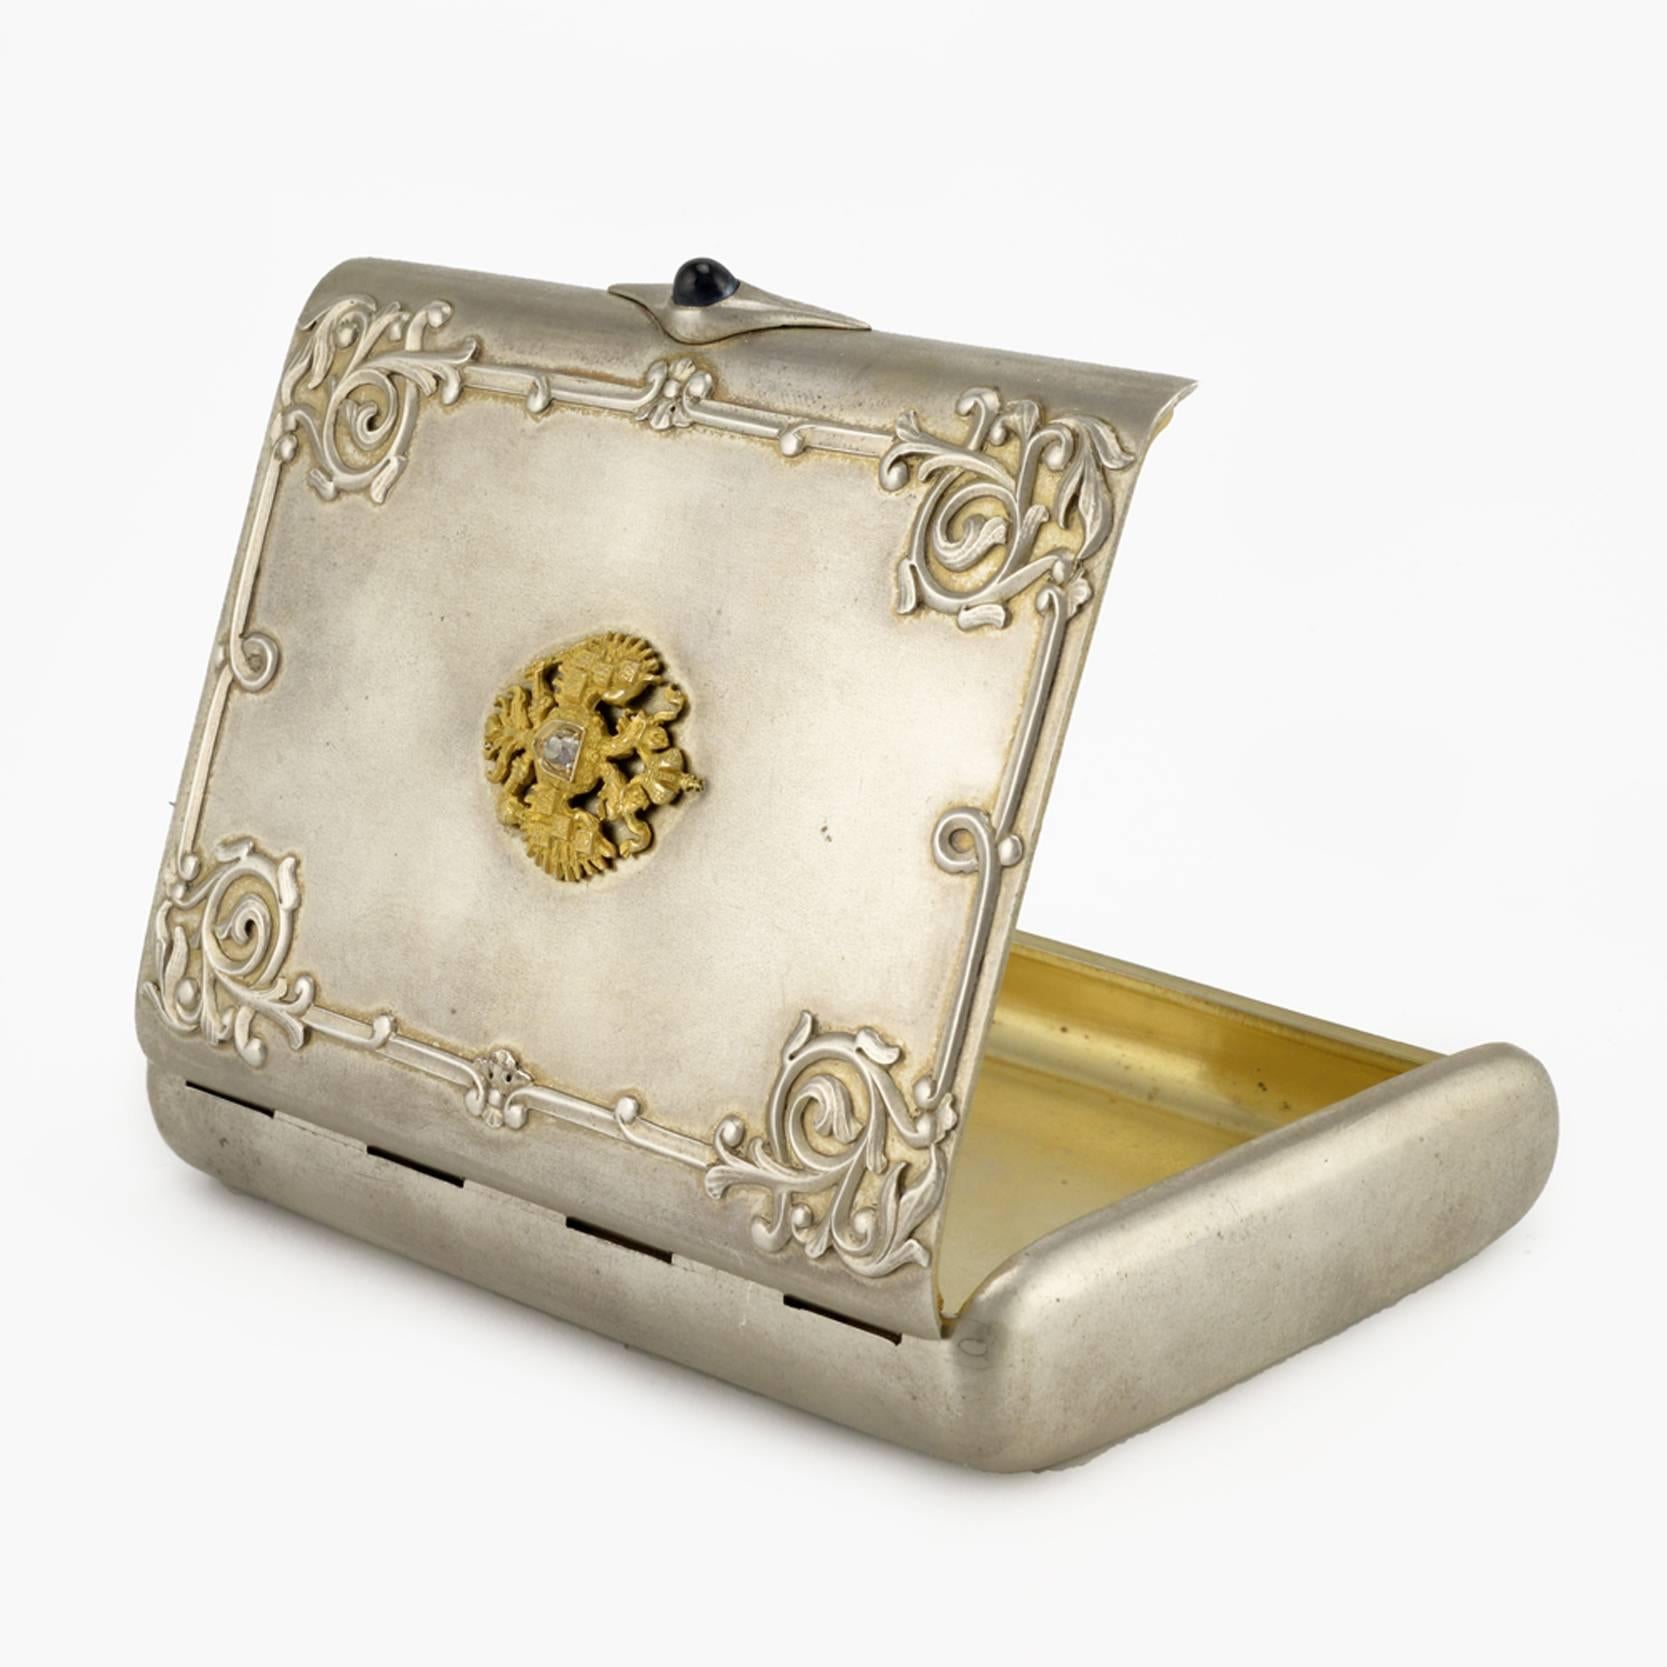 A Fabergé Imperial presentation jeweled silver cigarette case, workmaster Gabriel Niukkanen, St Petersburg, circa 1904-1908. Rounded rectangular, the hinged lid set with a scrolling foliate ornament in the Russian Style, centered with a gold